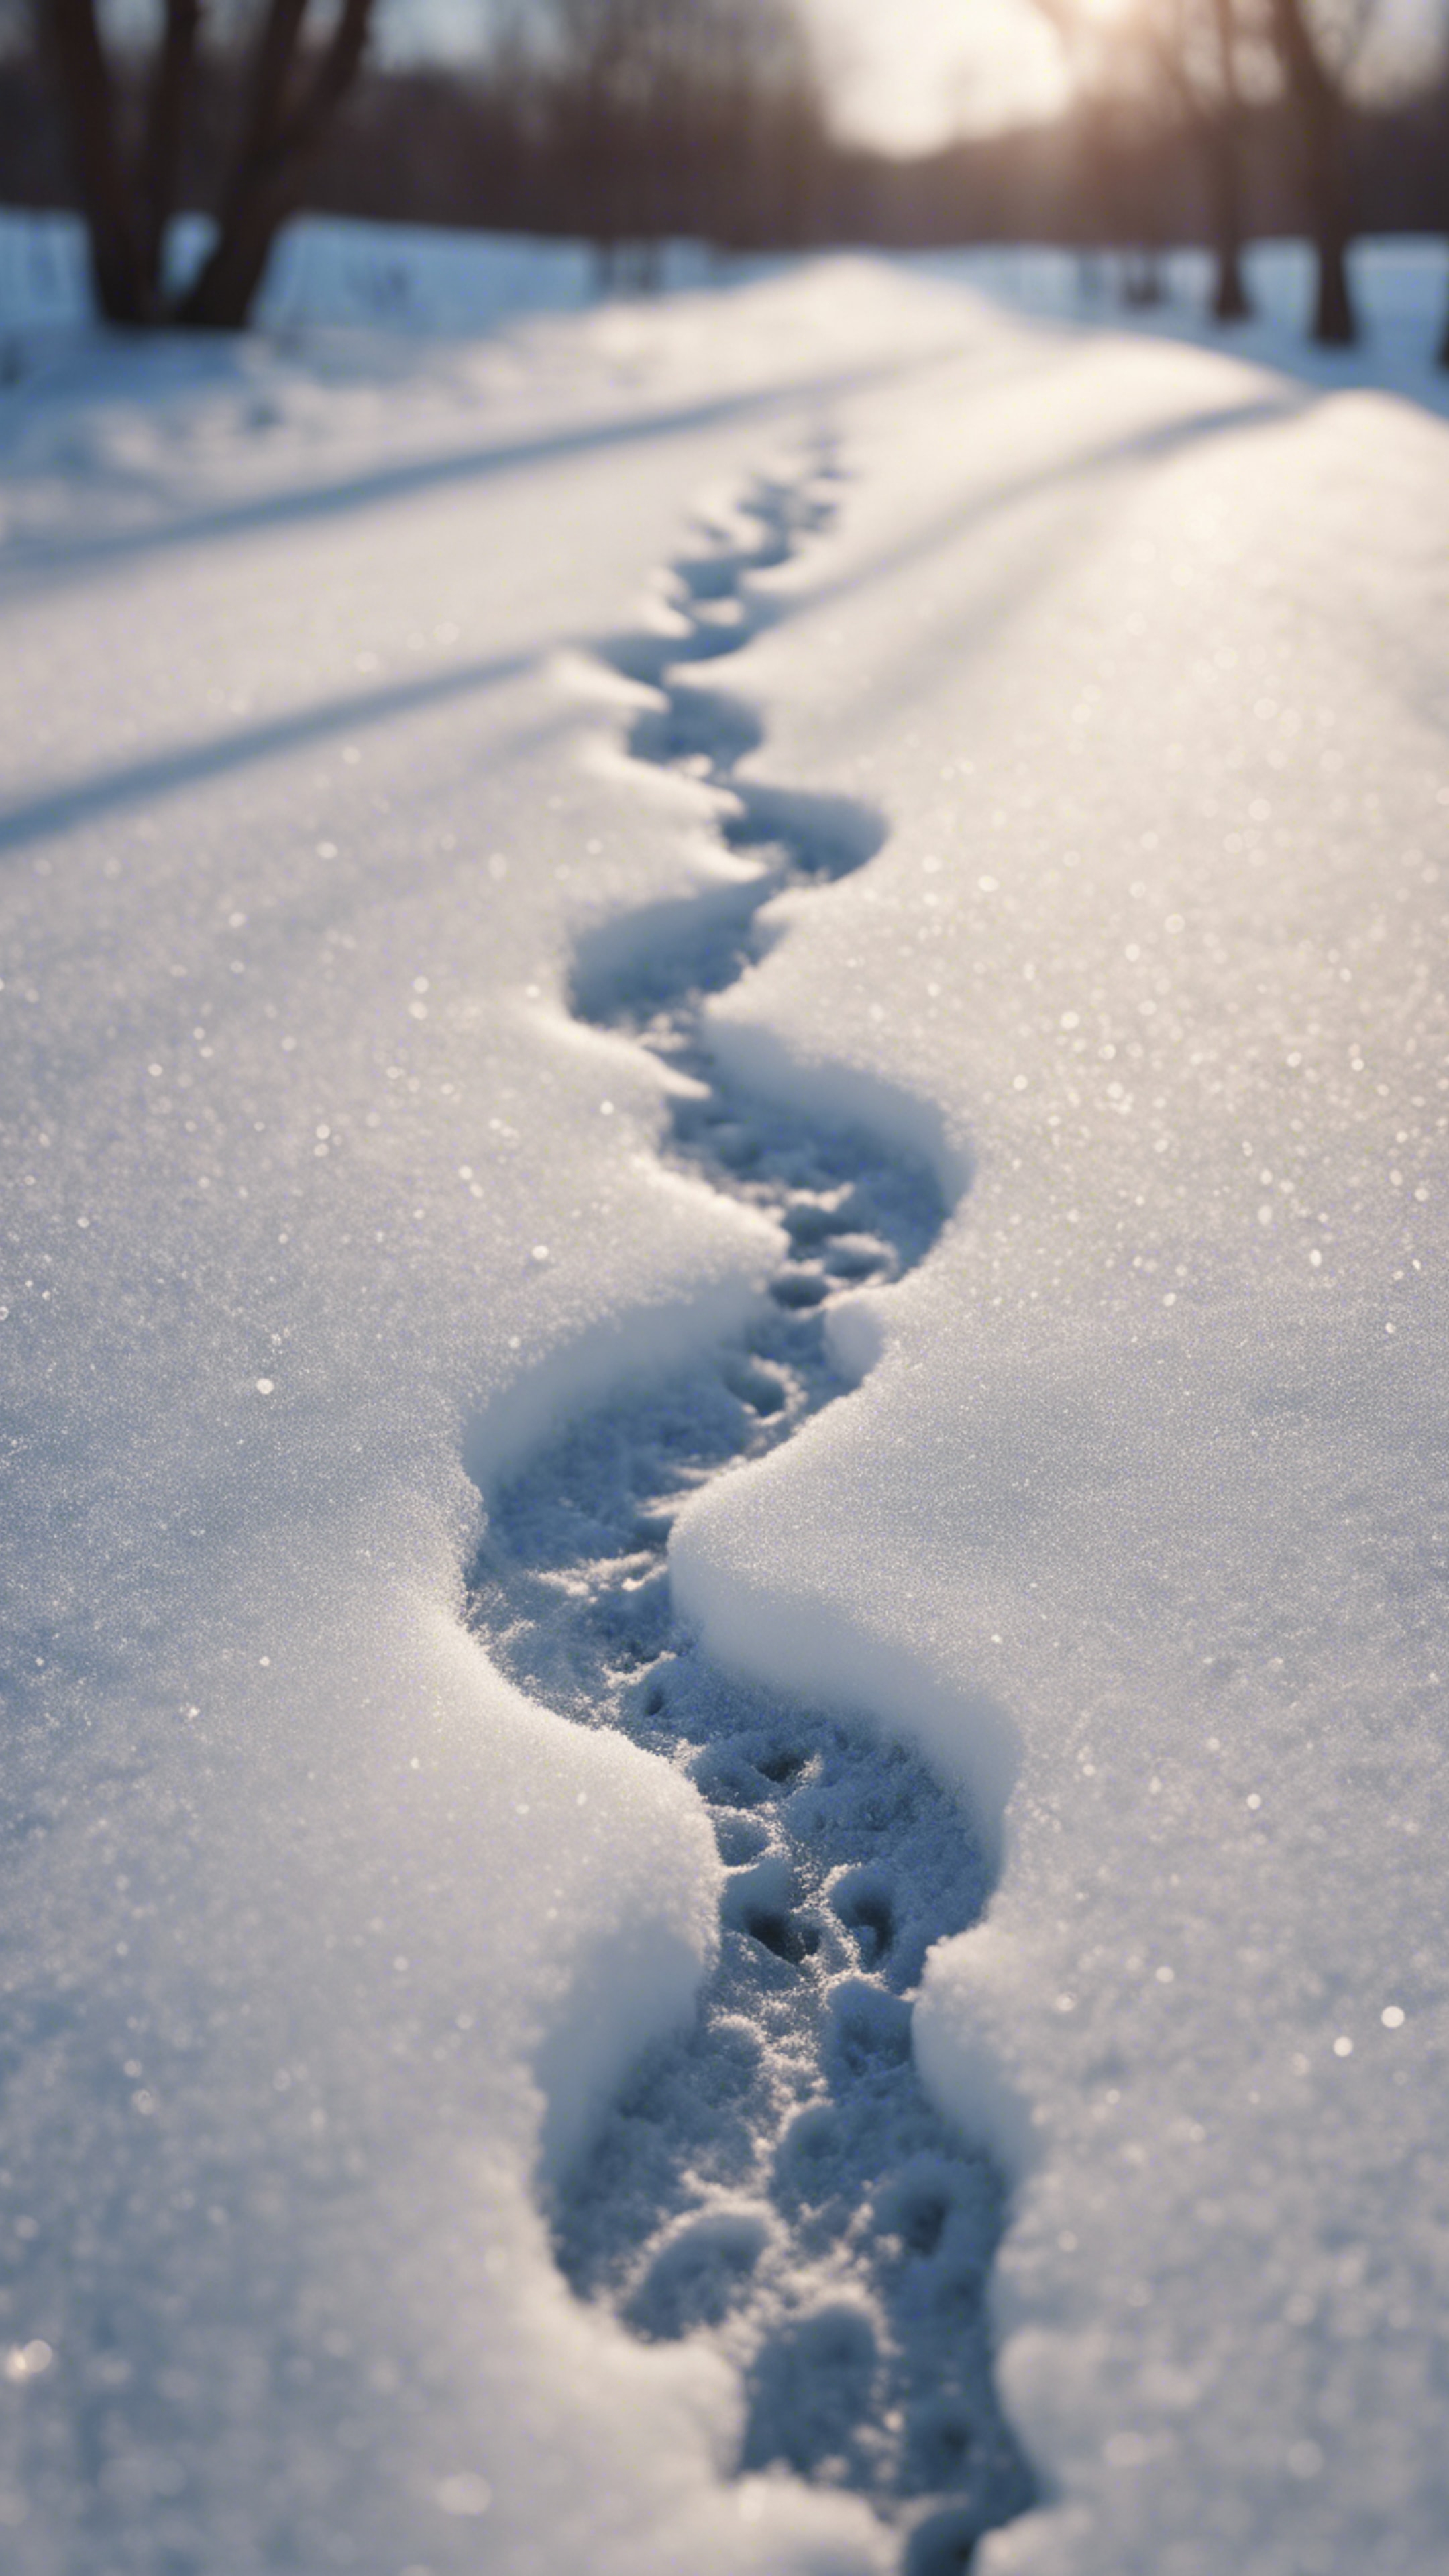 A pair of frosty, heart-shaped footprints imprinted on a snow-covered lane, symbolizing love in winter. Papel de parede[a9223da6c59742c6a00f]